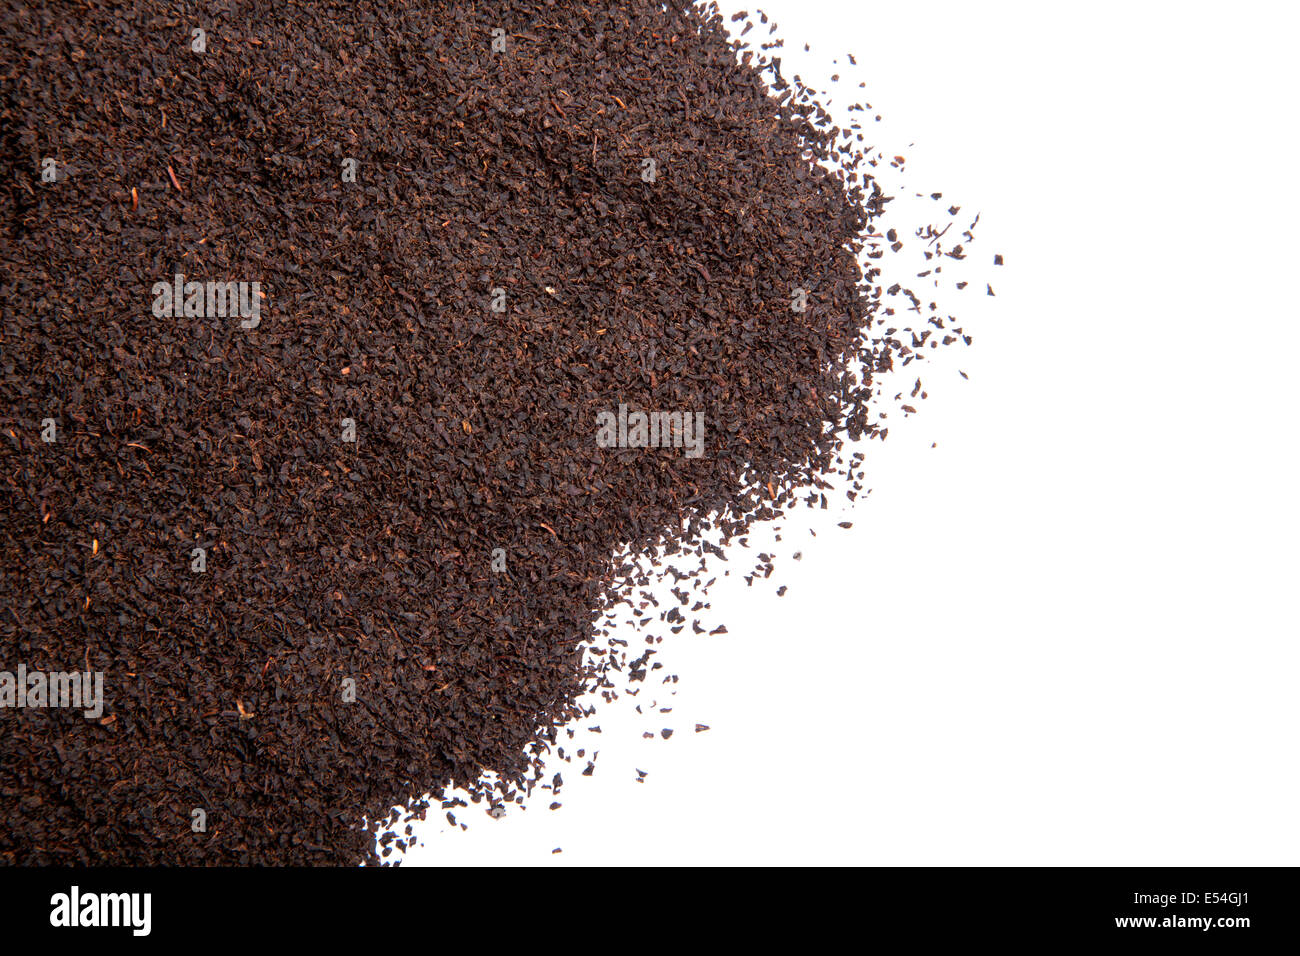 English Breakfast tea blend - dry leaves isolated on white background Stock Photo